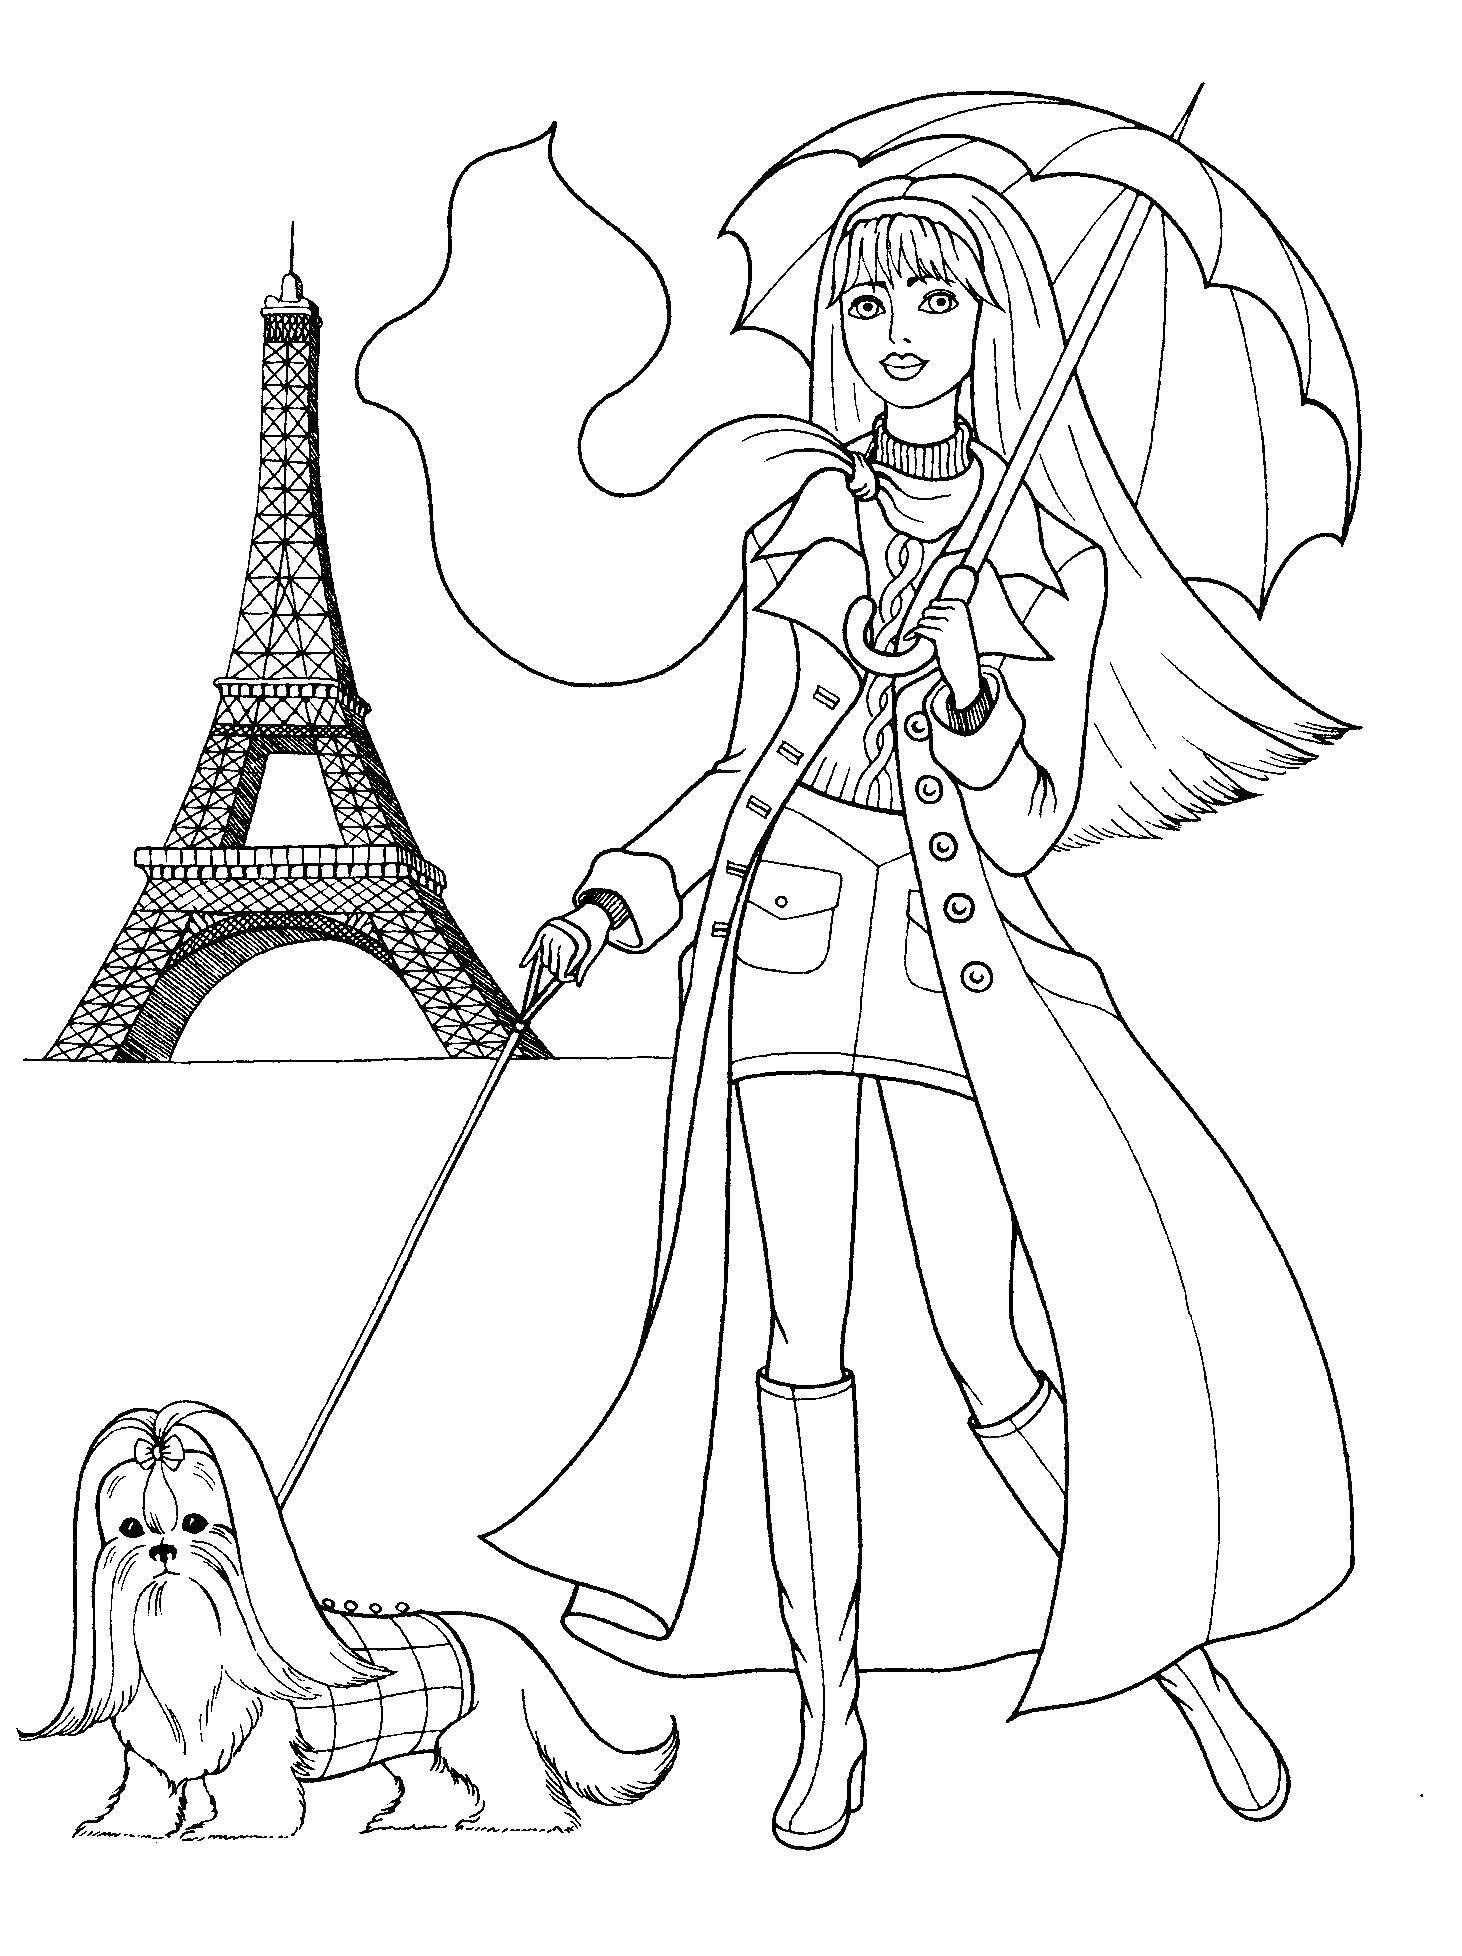 Coloring Girl-Barbie with a dog in the background shelevoi tower. Category coloring pages for girls. Tags:  girl, doll, Barbie, Alfaleh tower.